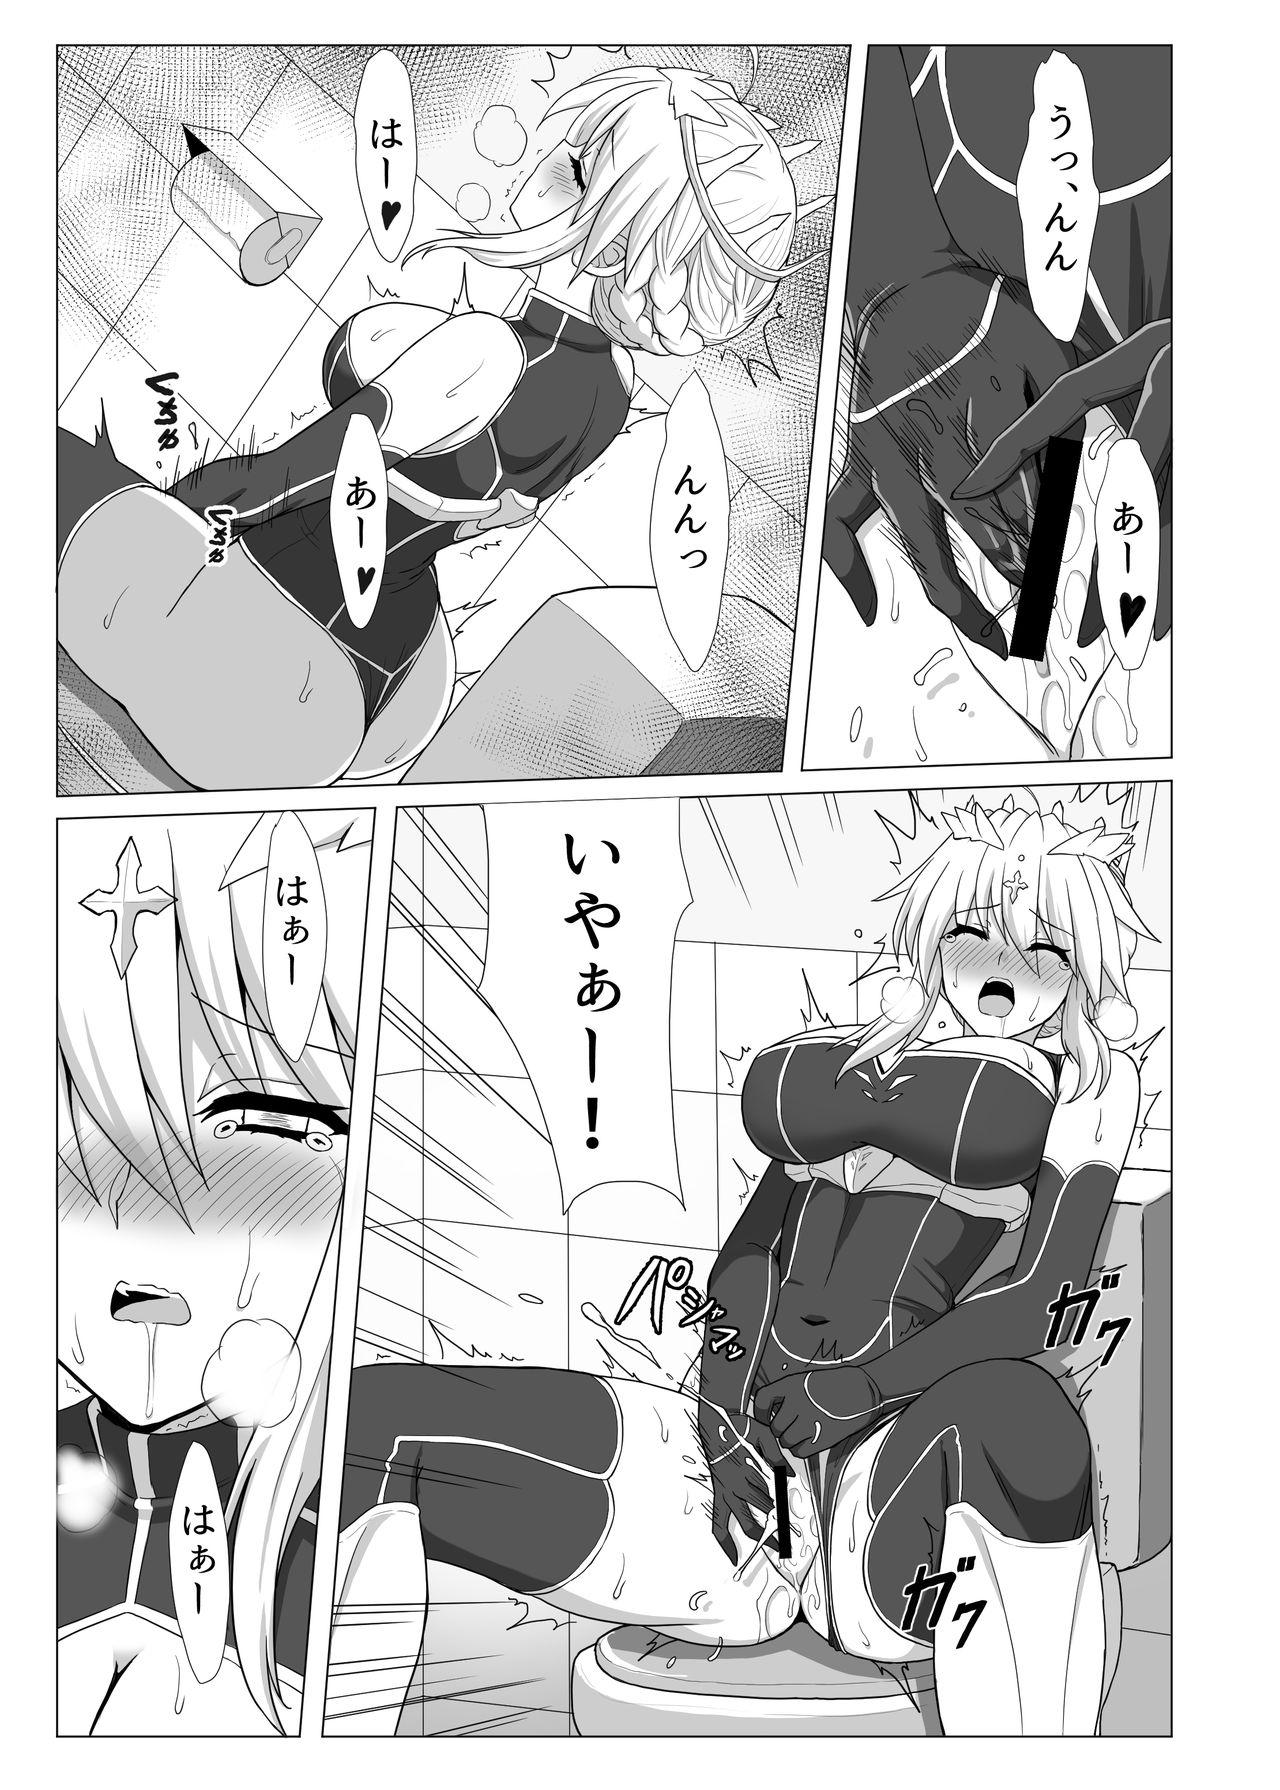 Strap On Fate/NTR - Fate grand order Fate stay night Big Cock - Page 12